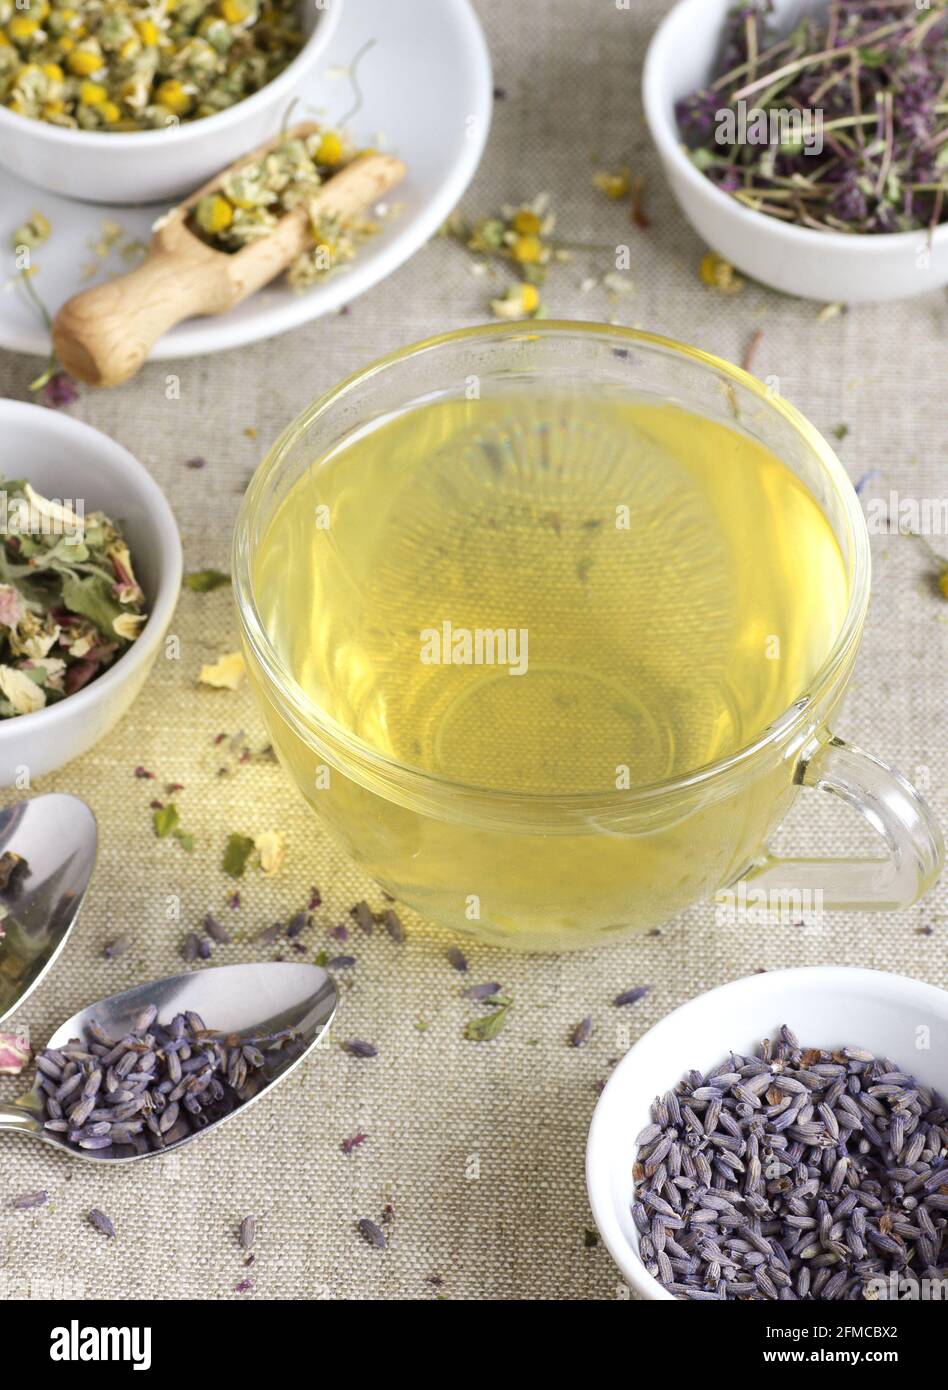 Chamomile herbal tea in glass cup and jar with dry herb flowers, above overhead view, naturopathy, natural medicine, healing drinks for sleep, skin an Stock Photo